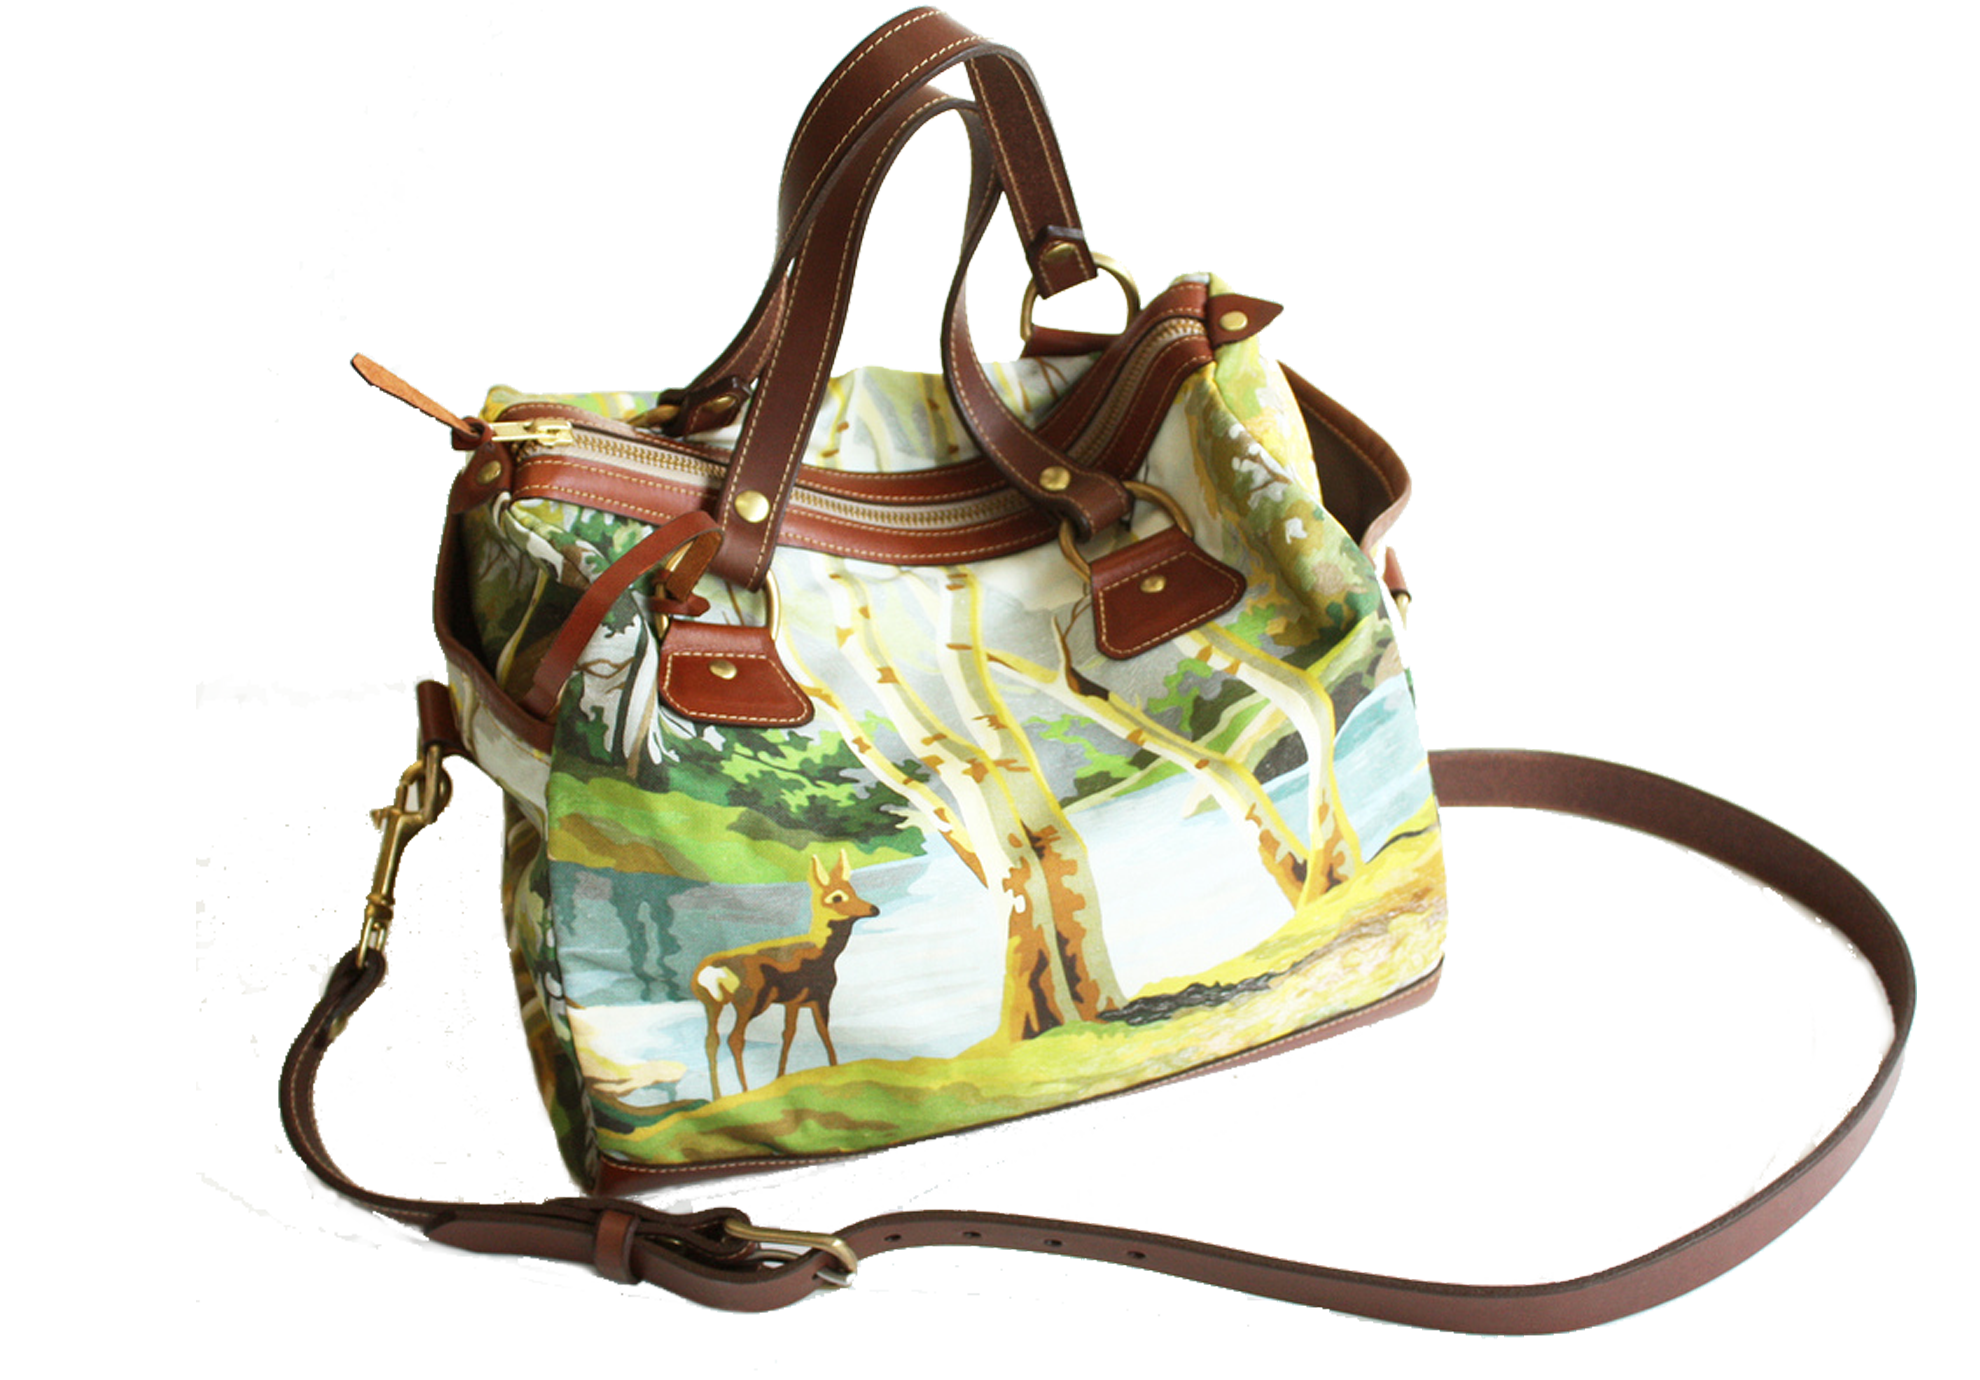 Limited edition bambi leather and canvas doctor bag signature made in Mtl Canda collab by Flechr Norwegian Wood Angie Johnson